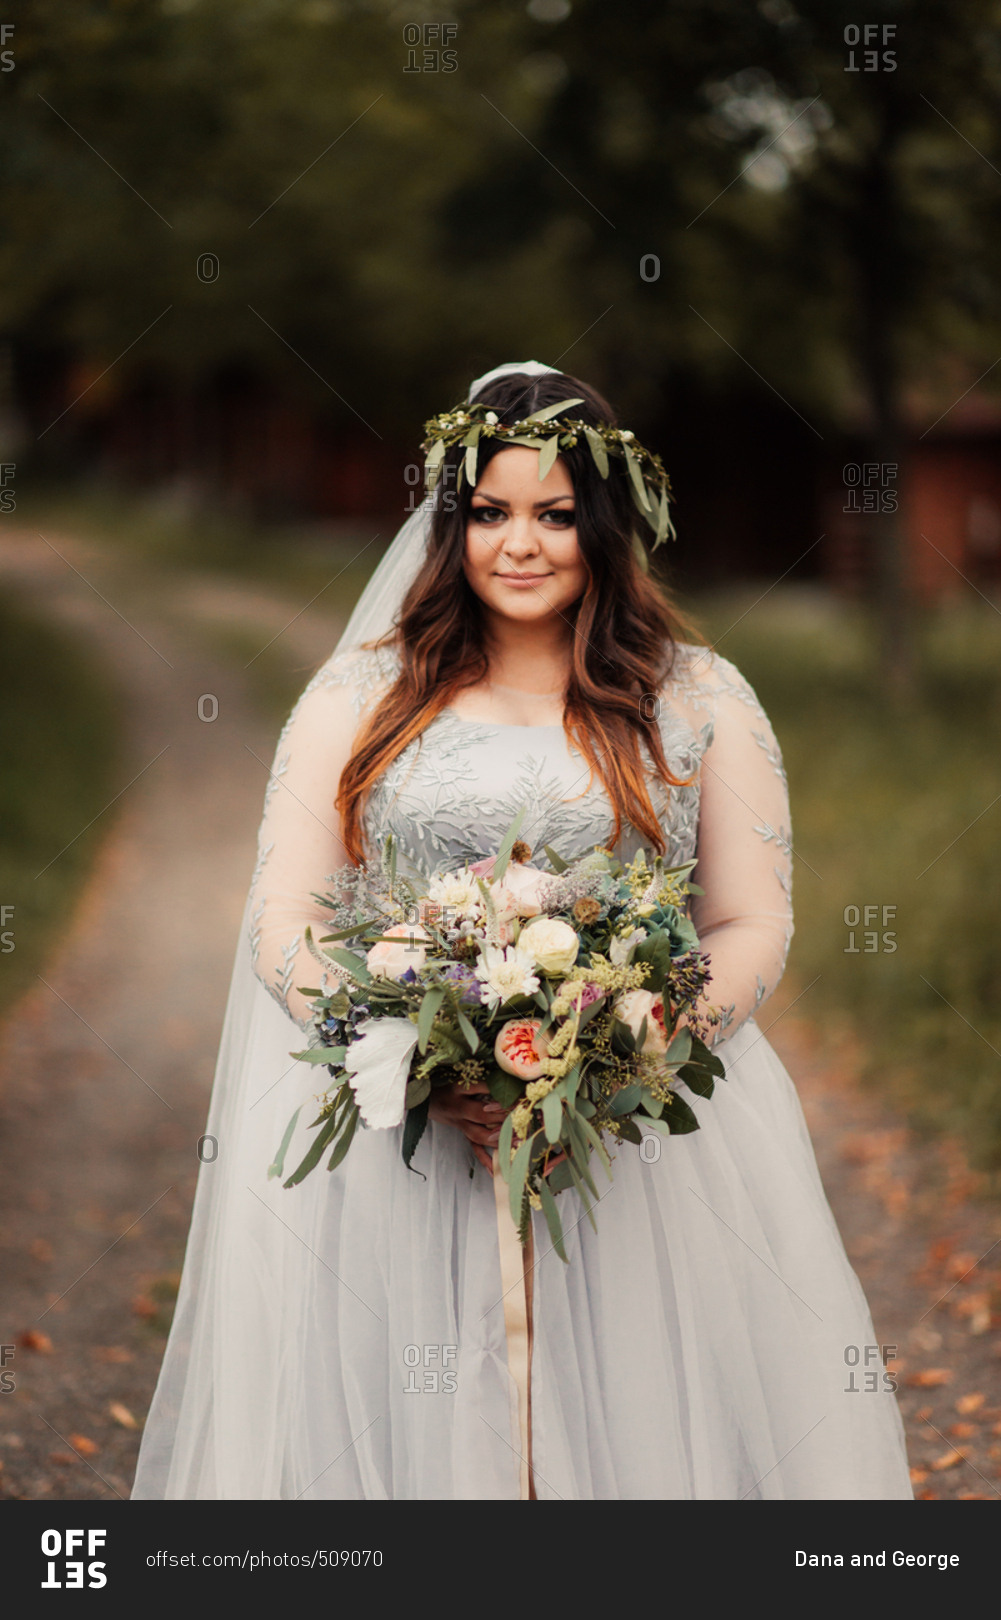 Bride with her bouquet on rural path